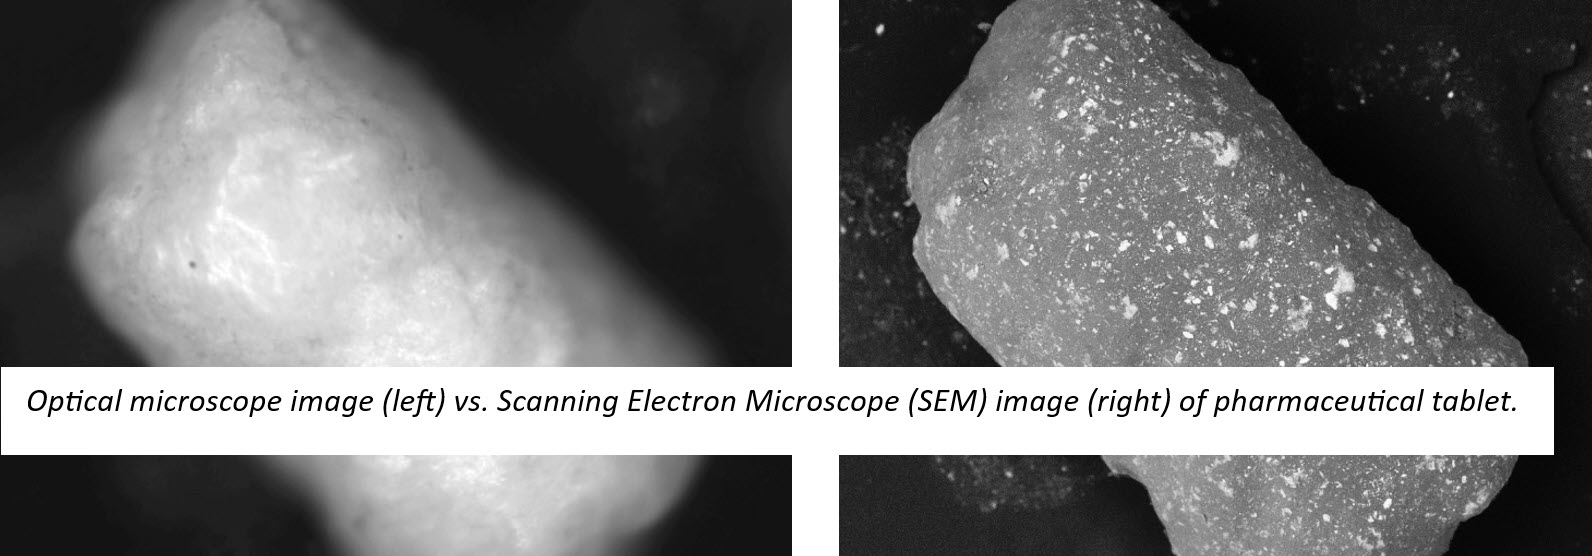 Optical microscope image (left) vs. Scanning Electron Microscope (SEM) image (right) of pharmaceutical tablet